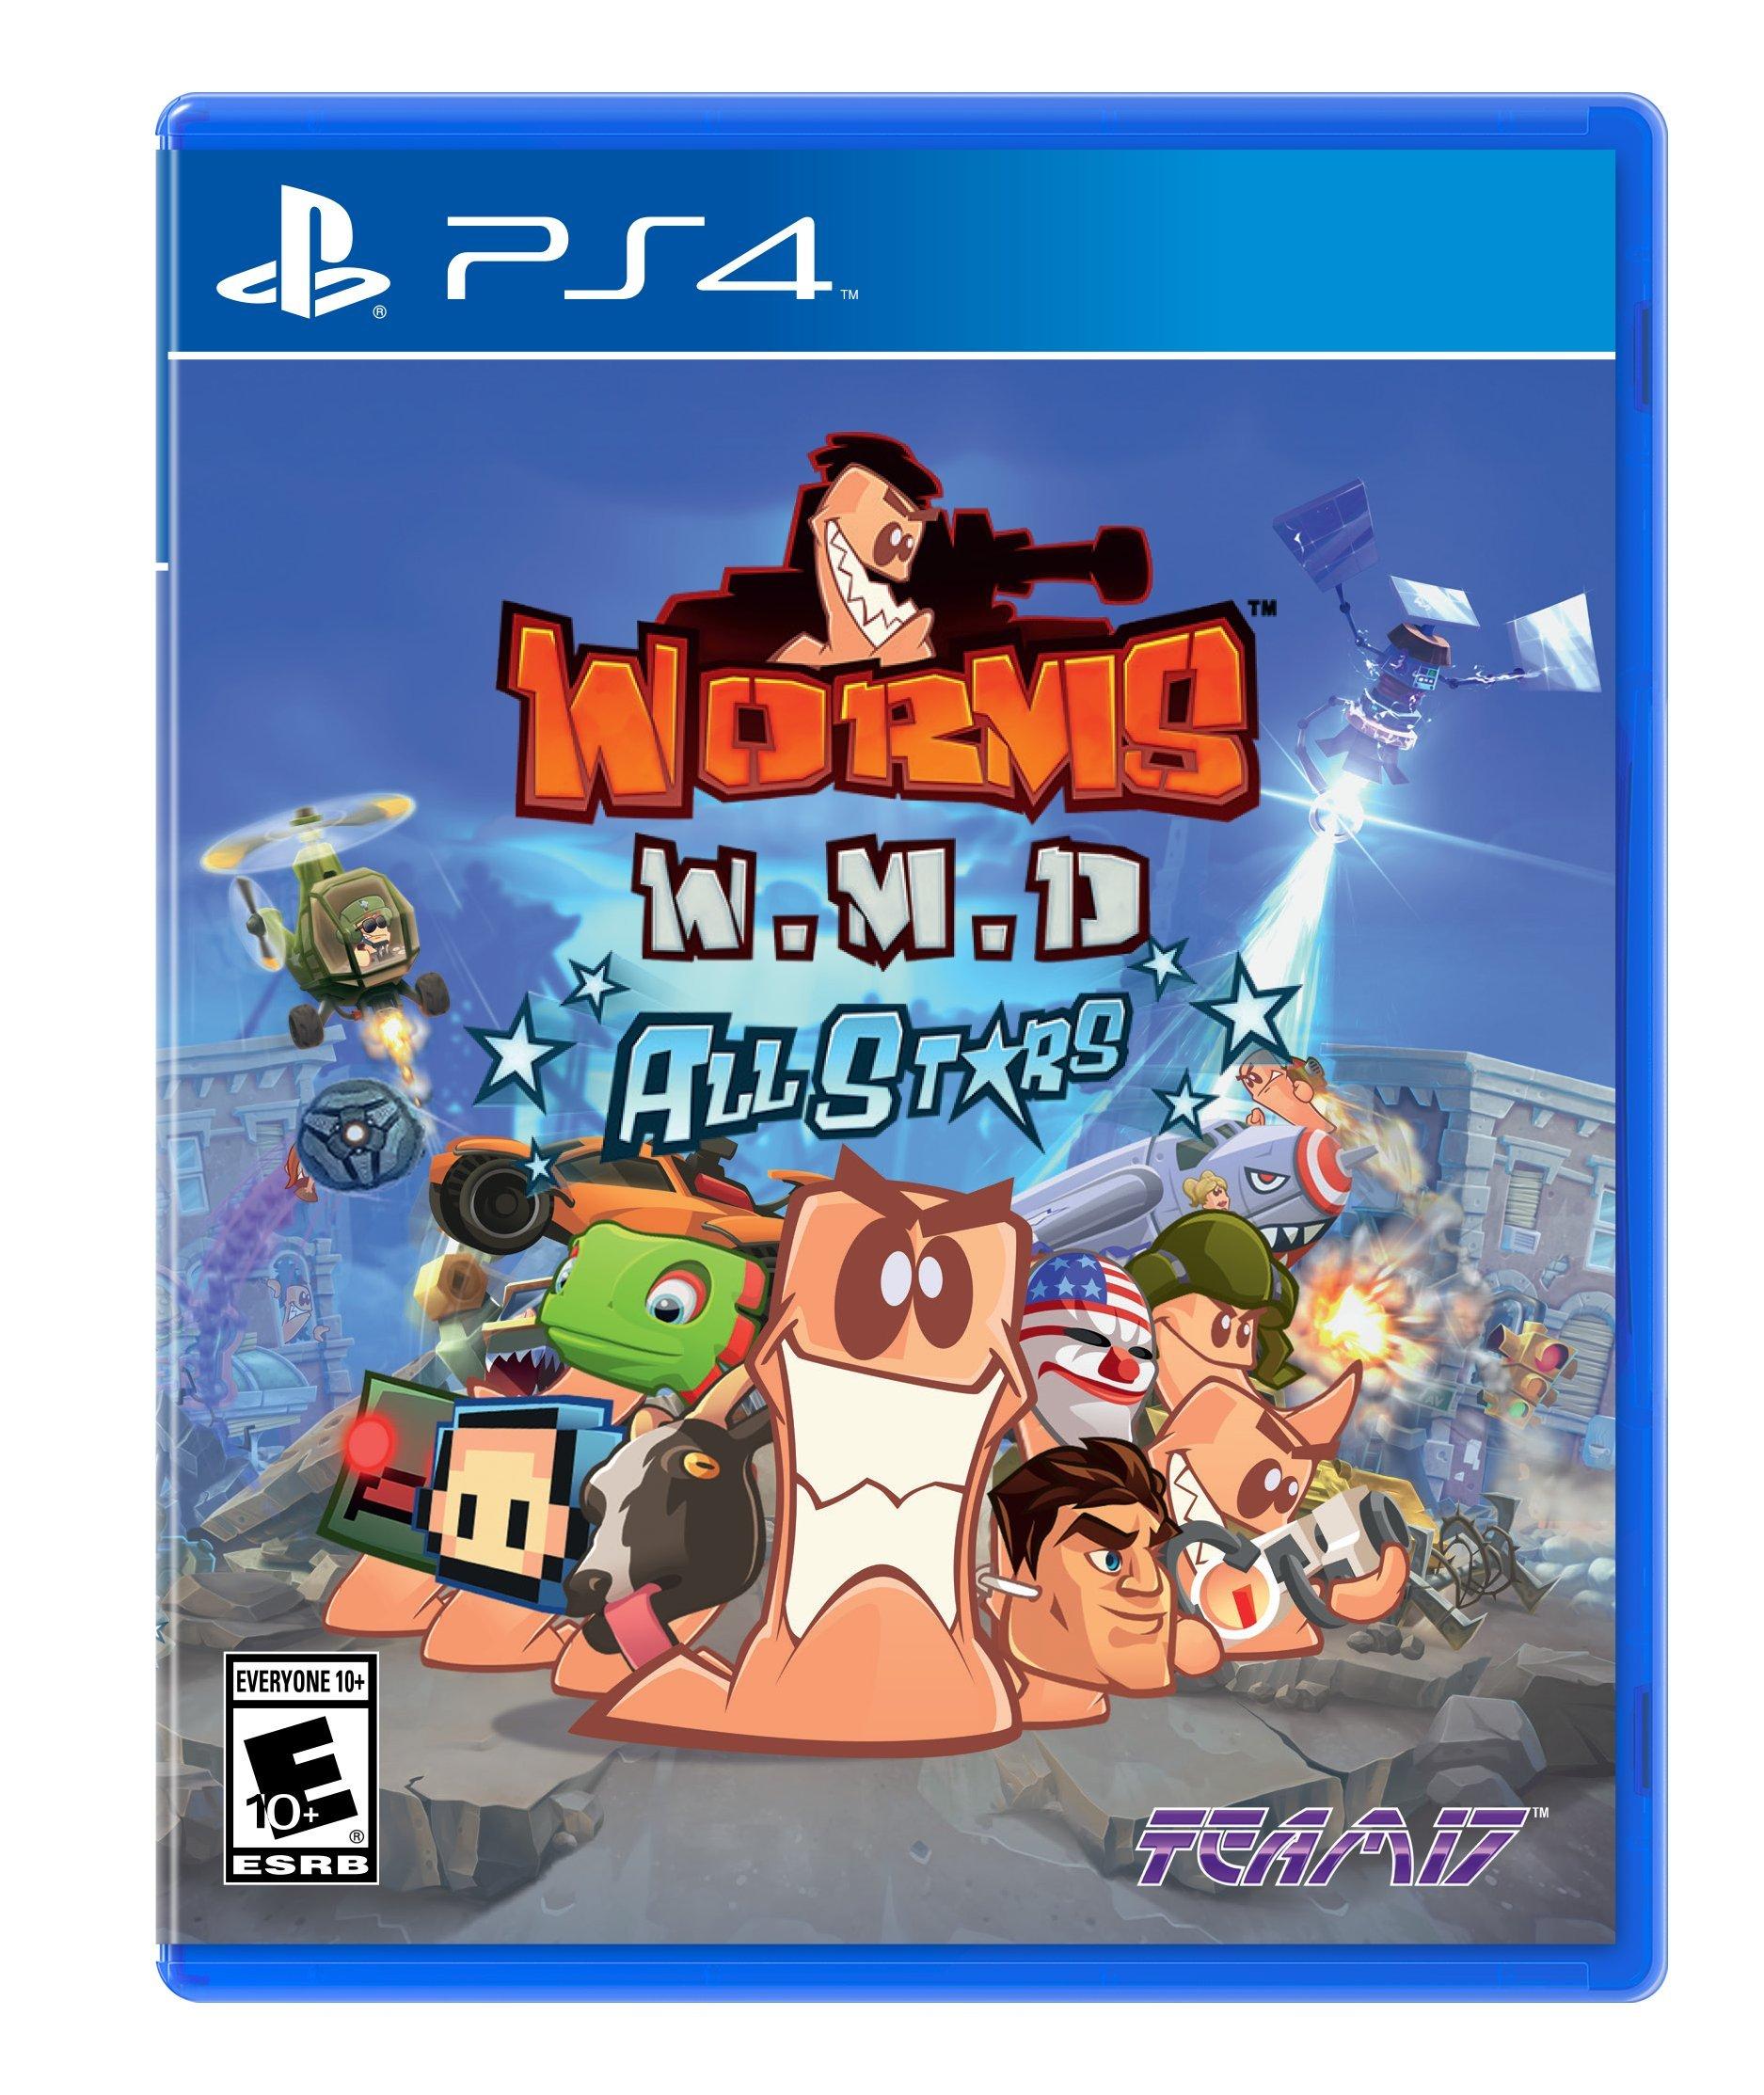 Worms W.M.D: All Stars